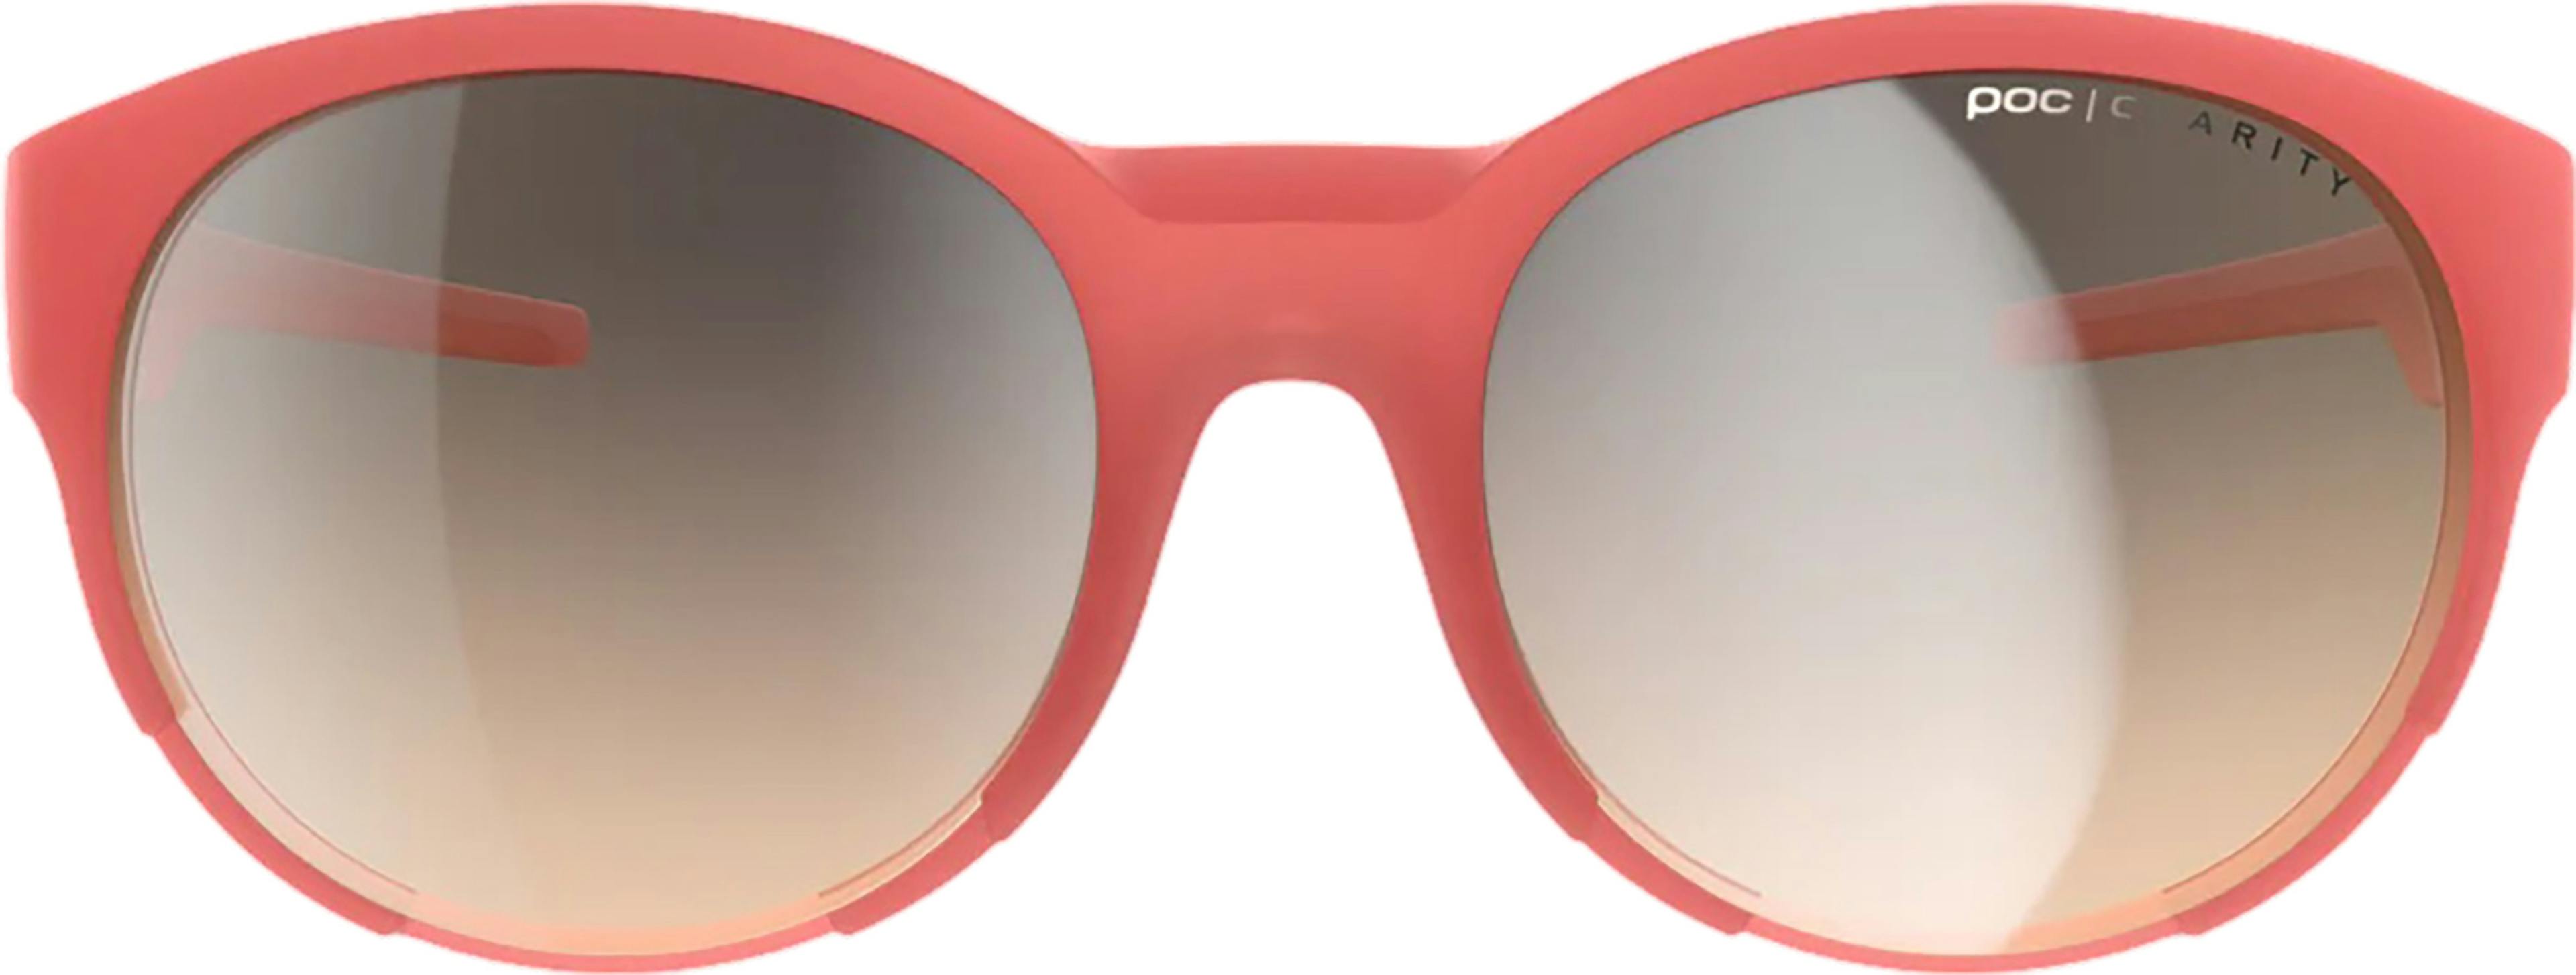 Product image for Avail Sunglasses - Unisex